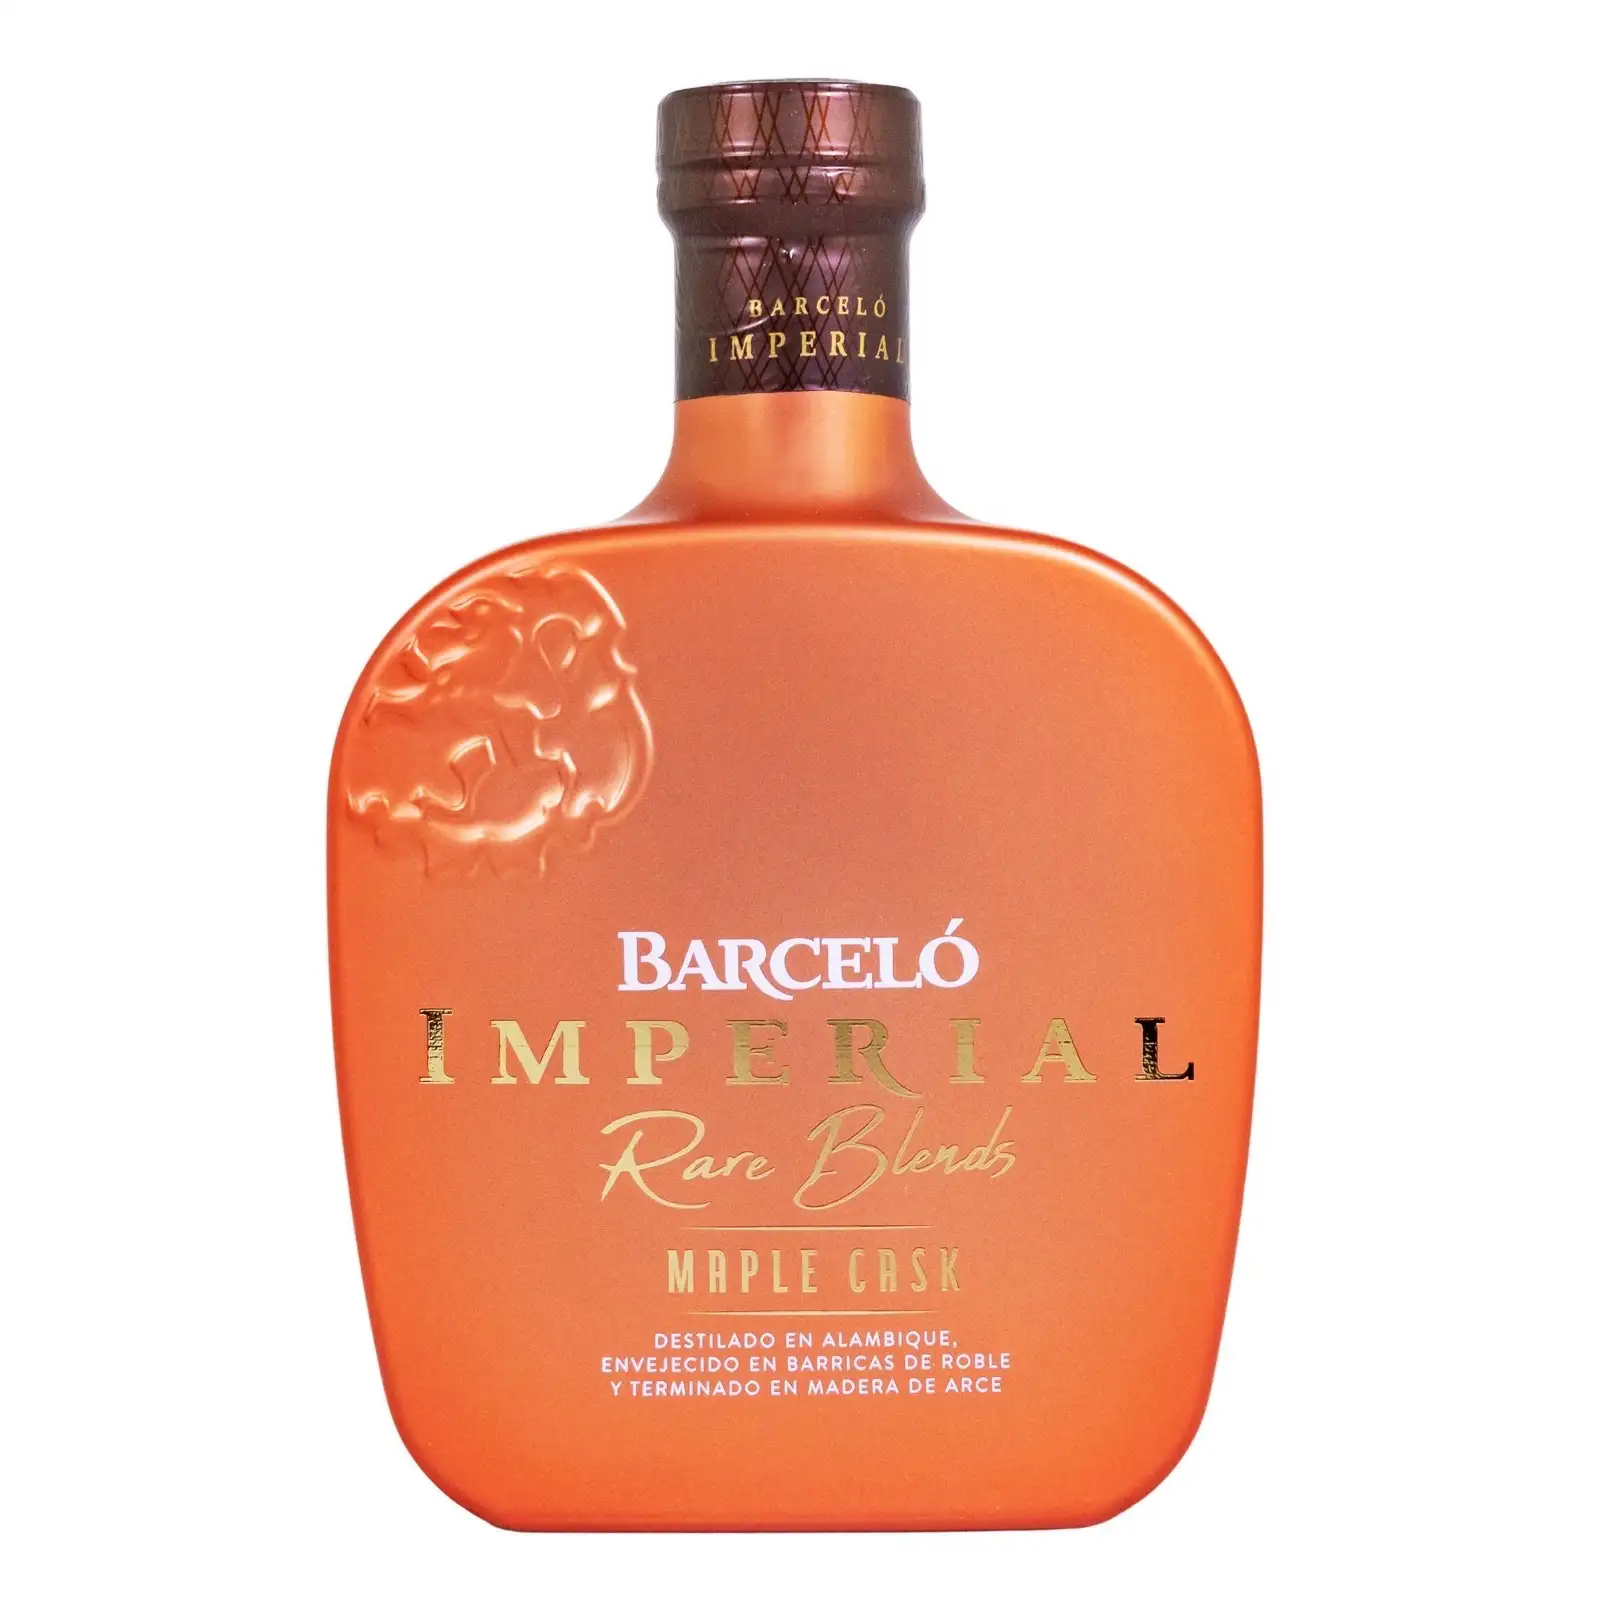 Image of the front of the bottle of the rum Ron Barceló Imperial Rare Blend Maple Cask